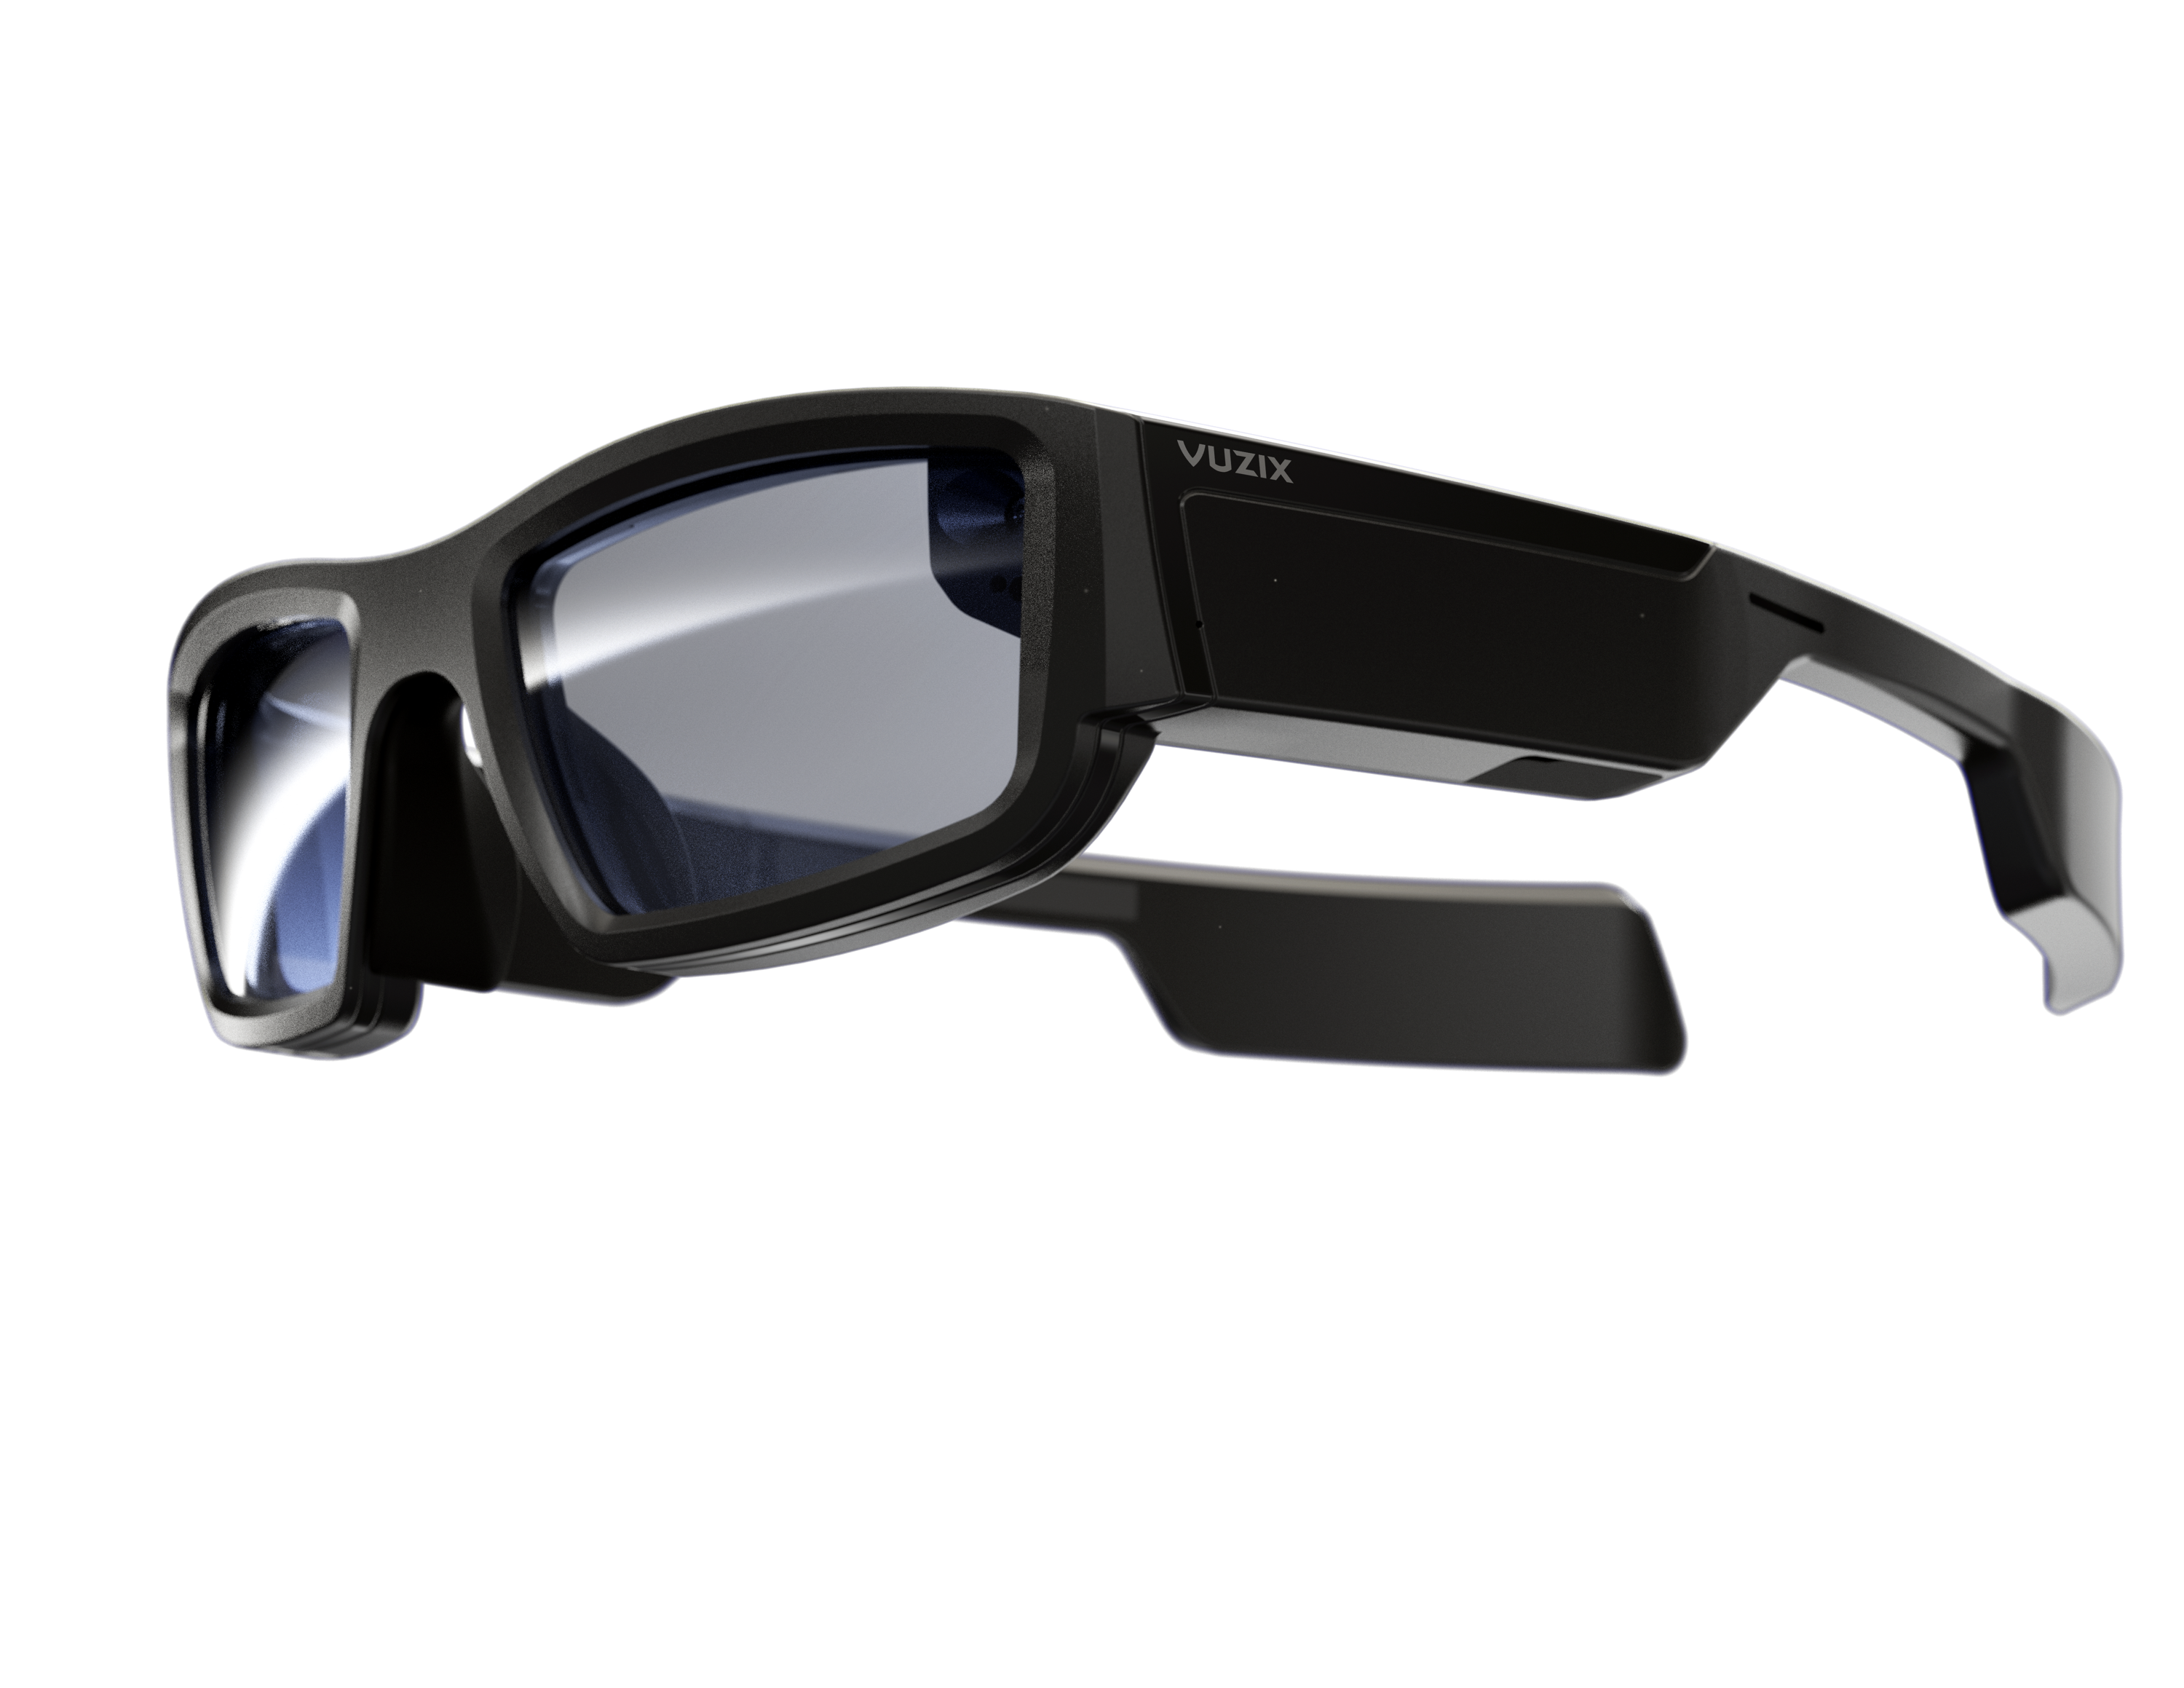 Angled side view of the heads-up, hands-free Vuzix Blade smart glasses with the lenses facing left.